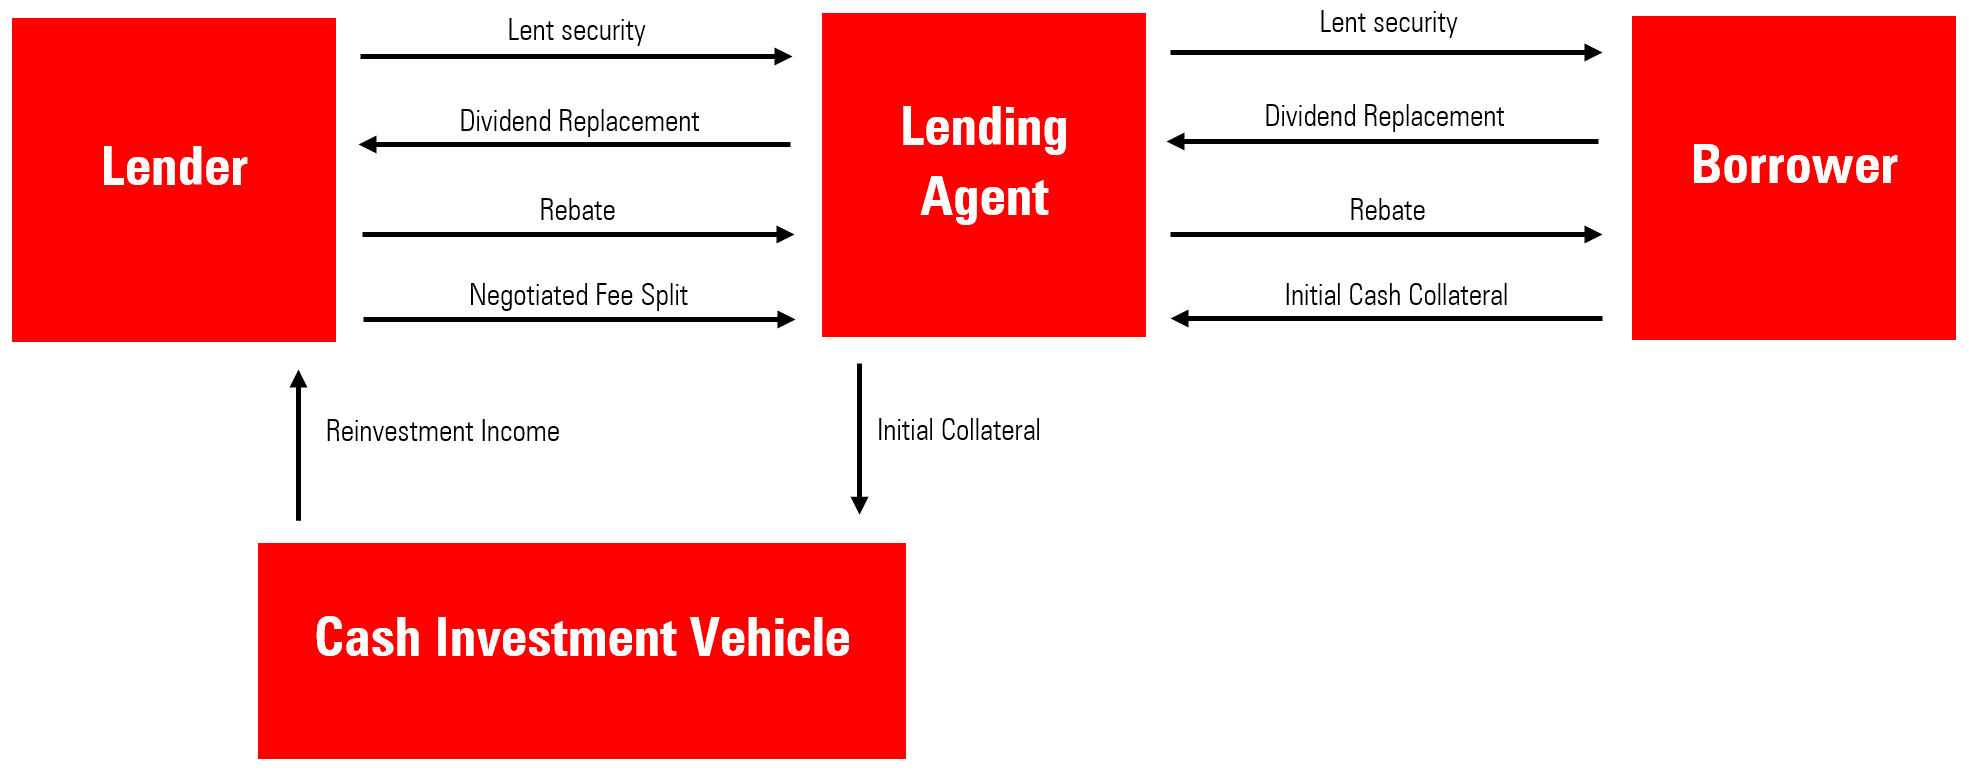 Overview of a Securities Lending Transaction with Cash Collateral